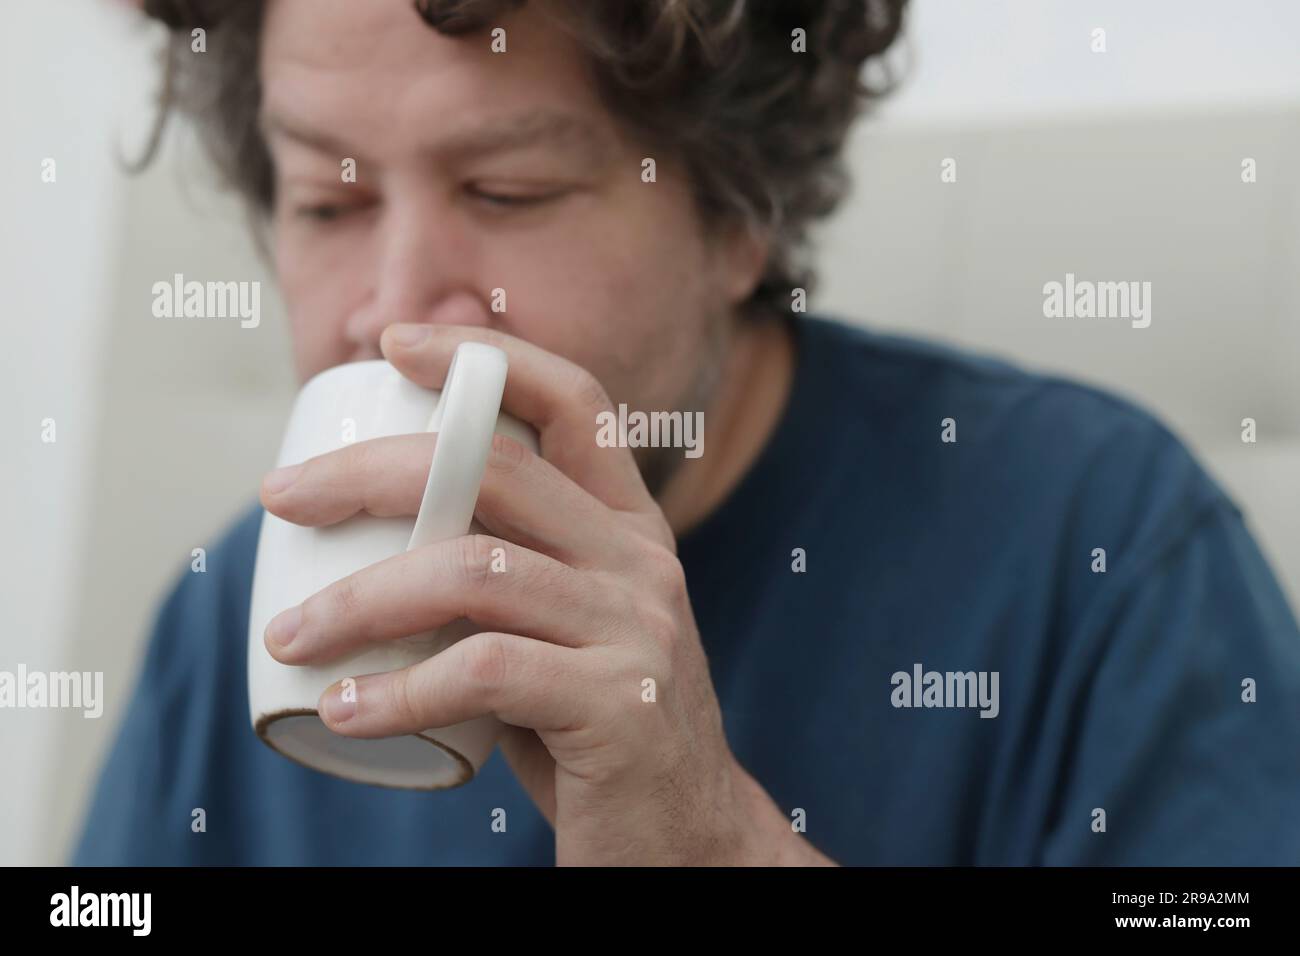 portrait caucasian man drinking from a large cup Stock Photo